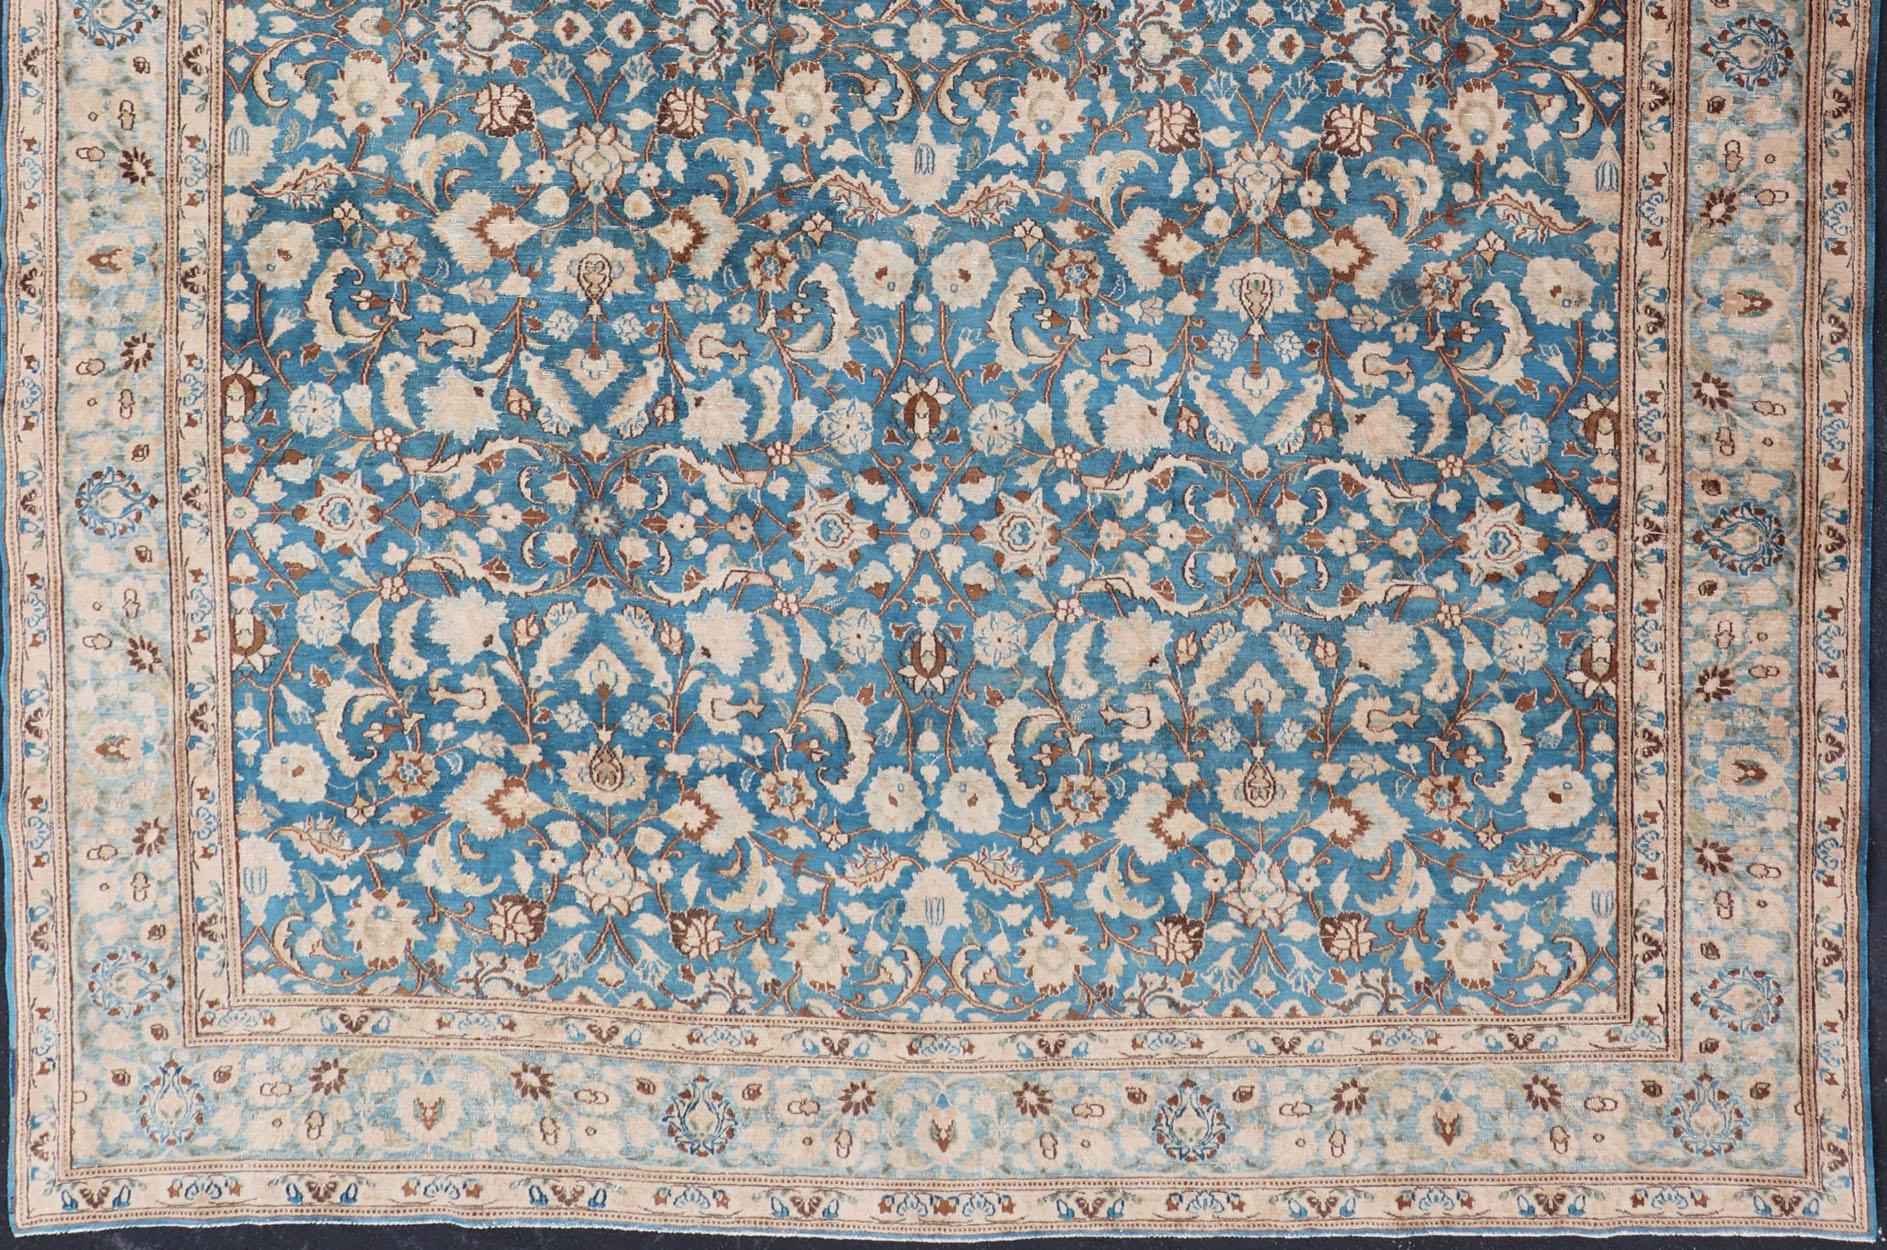 Hand-Knotted Turquoise Blue Background Antique Persian Khorassan Rug with Light Blue Border